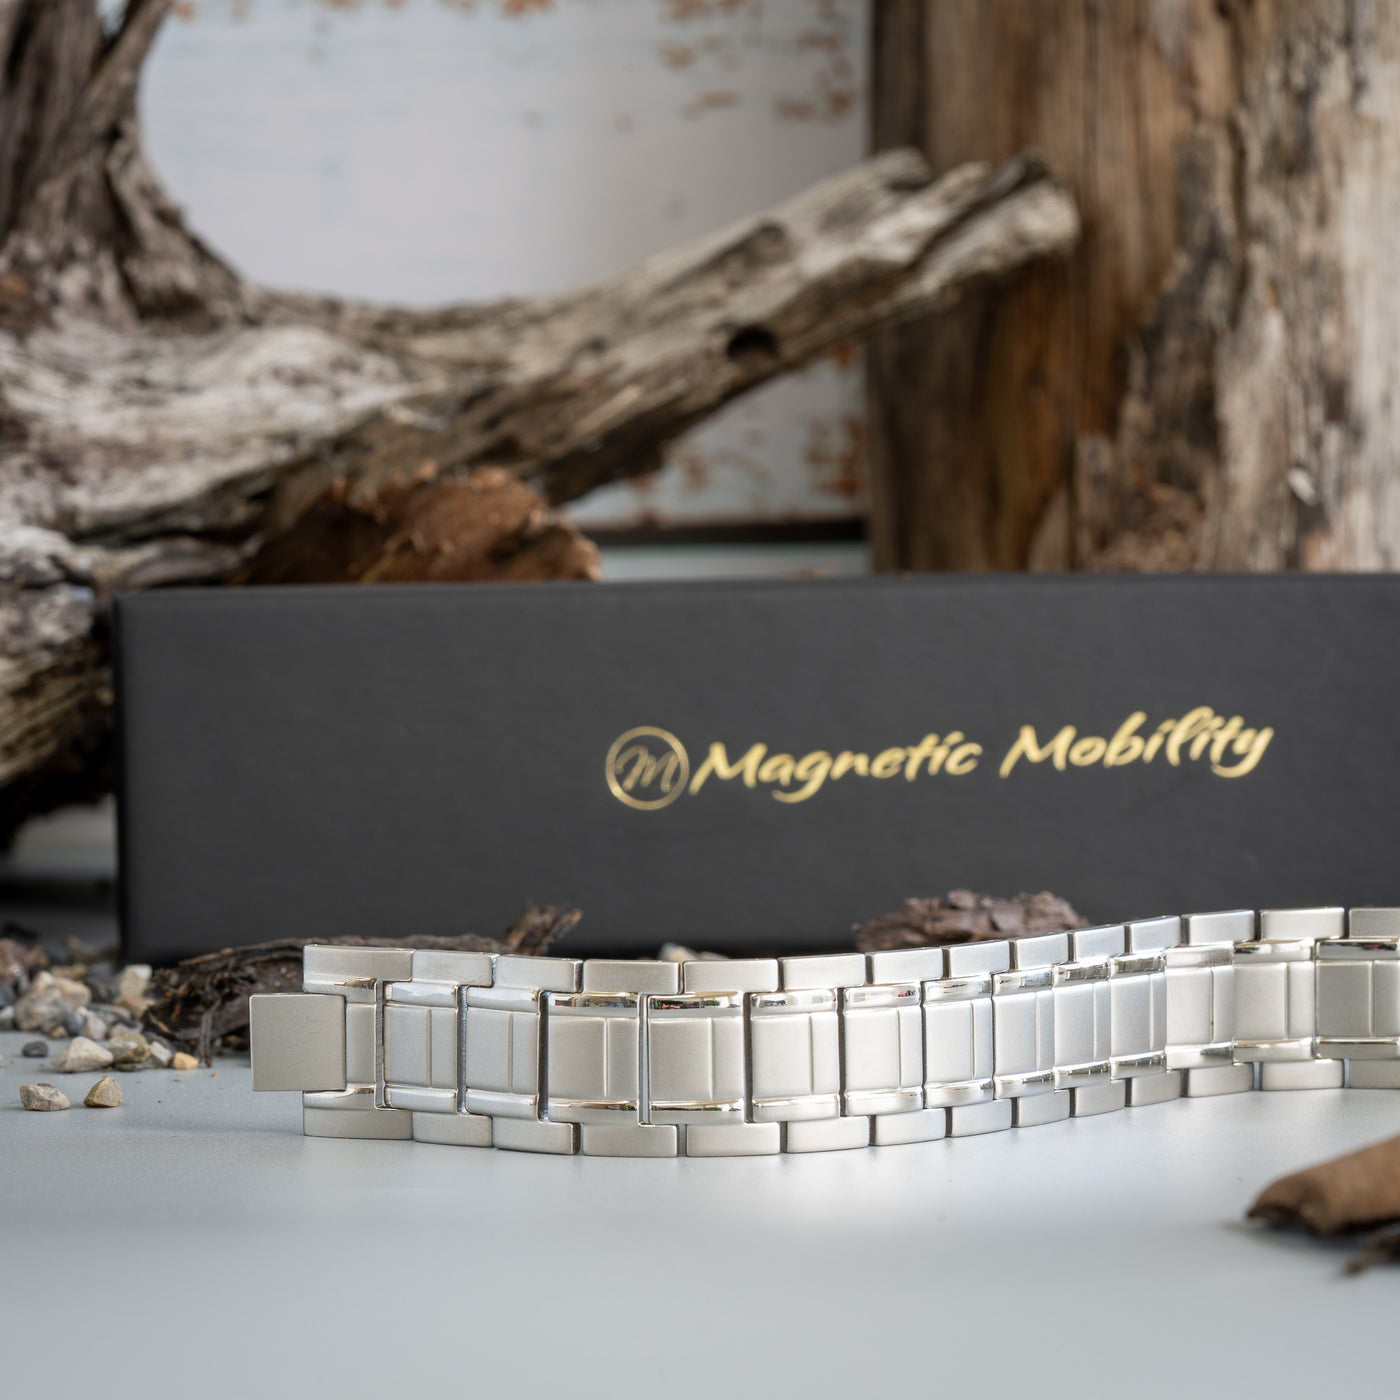 Featuring the Birch Star 4in1 Magnetic Bracelet closed, displayed with our luxury, sustainable gift box. An exquisite gift embracing both style and health.